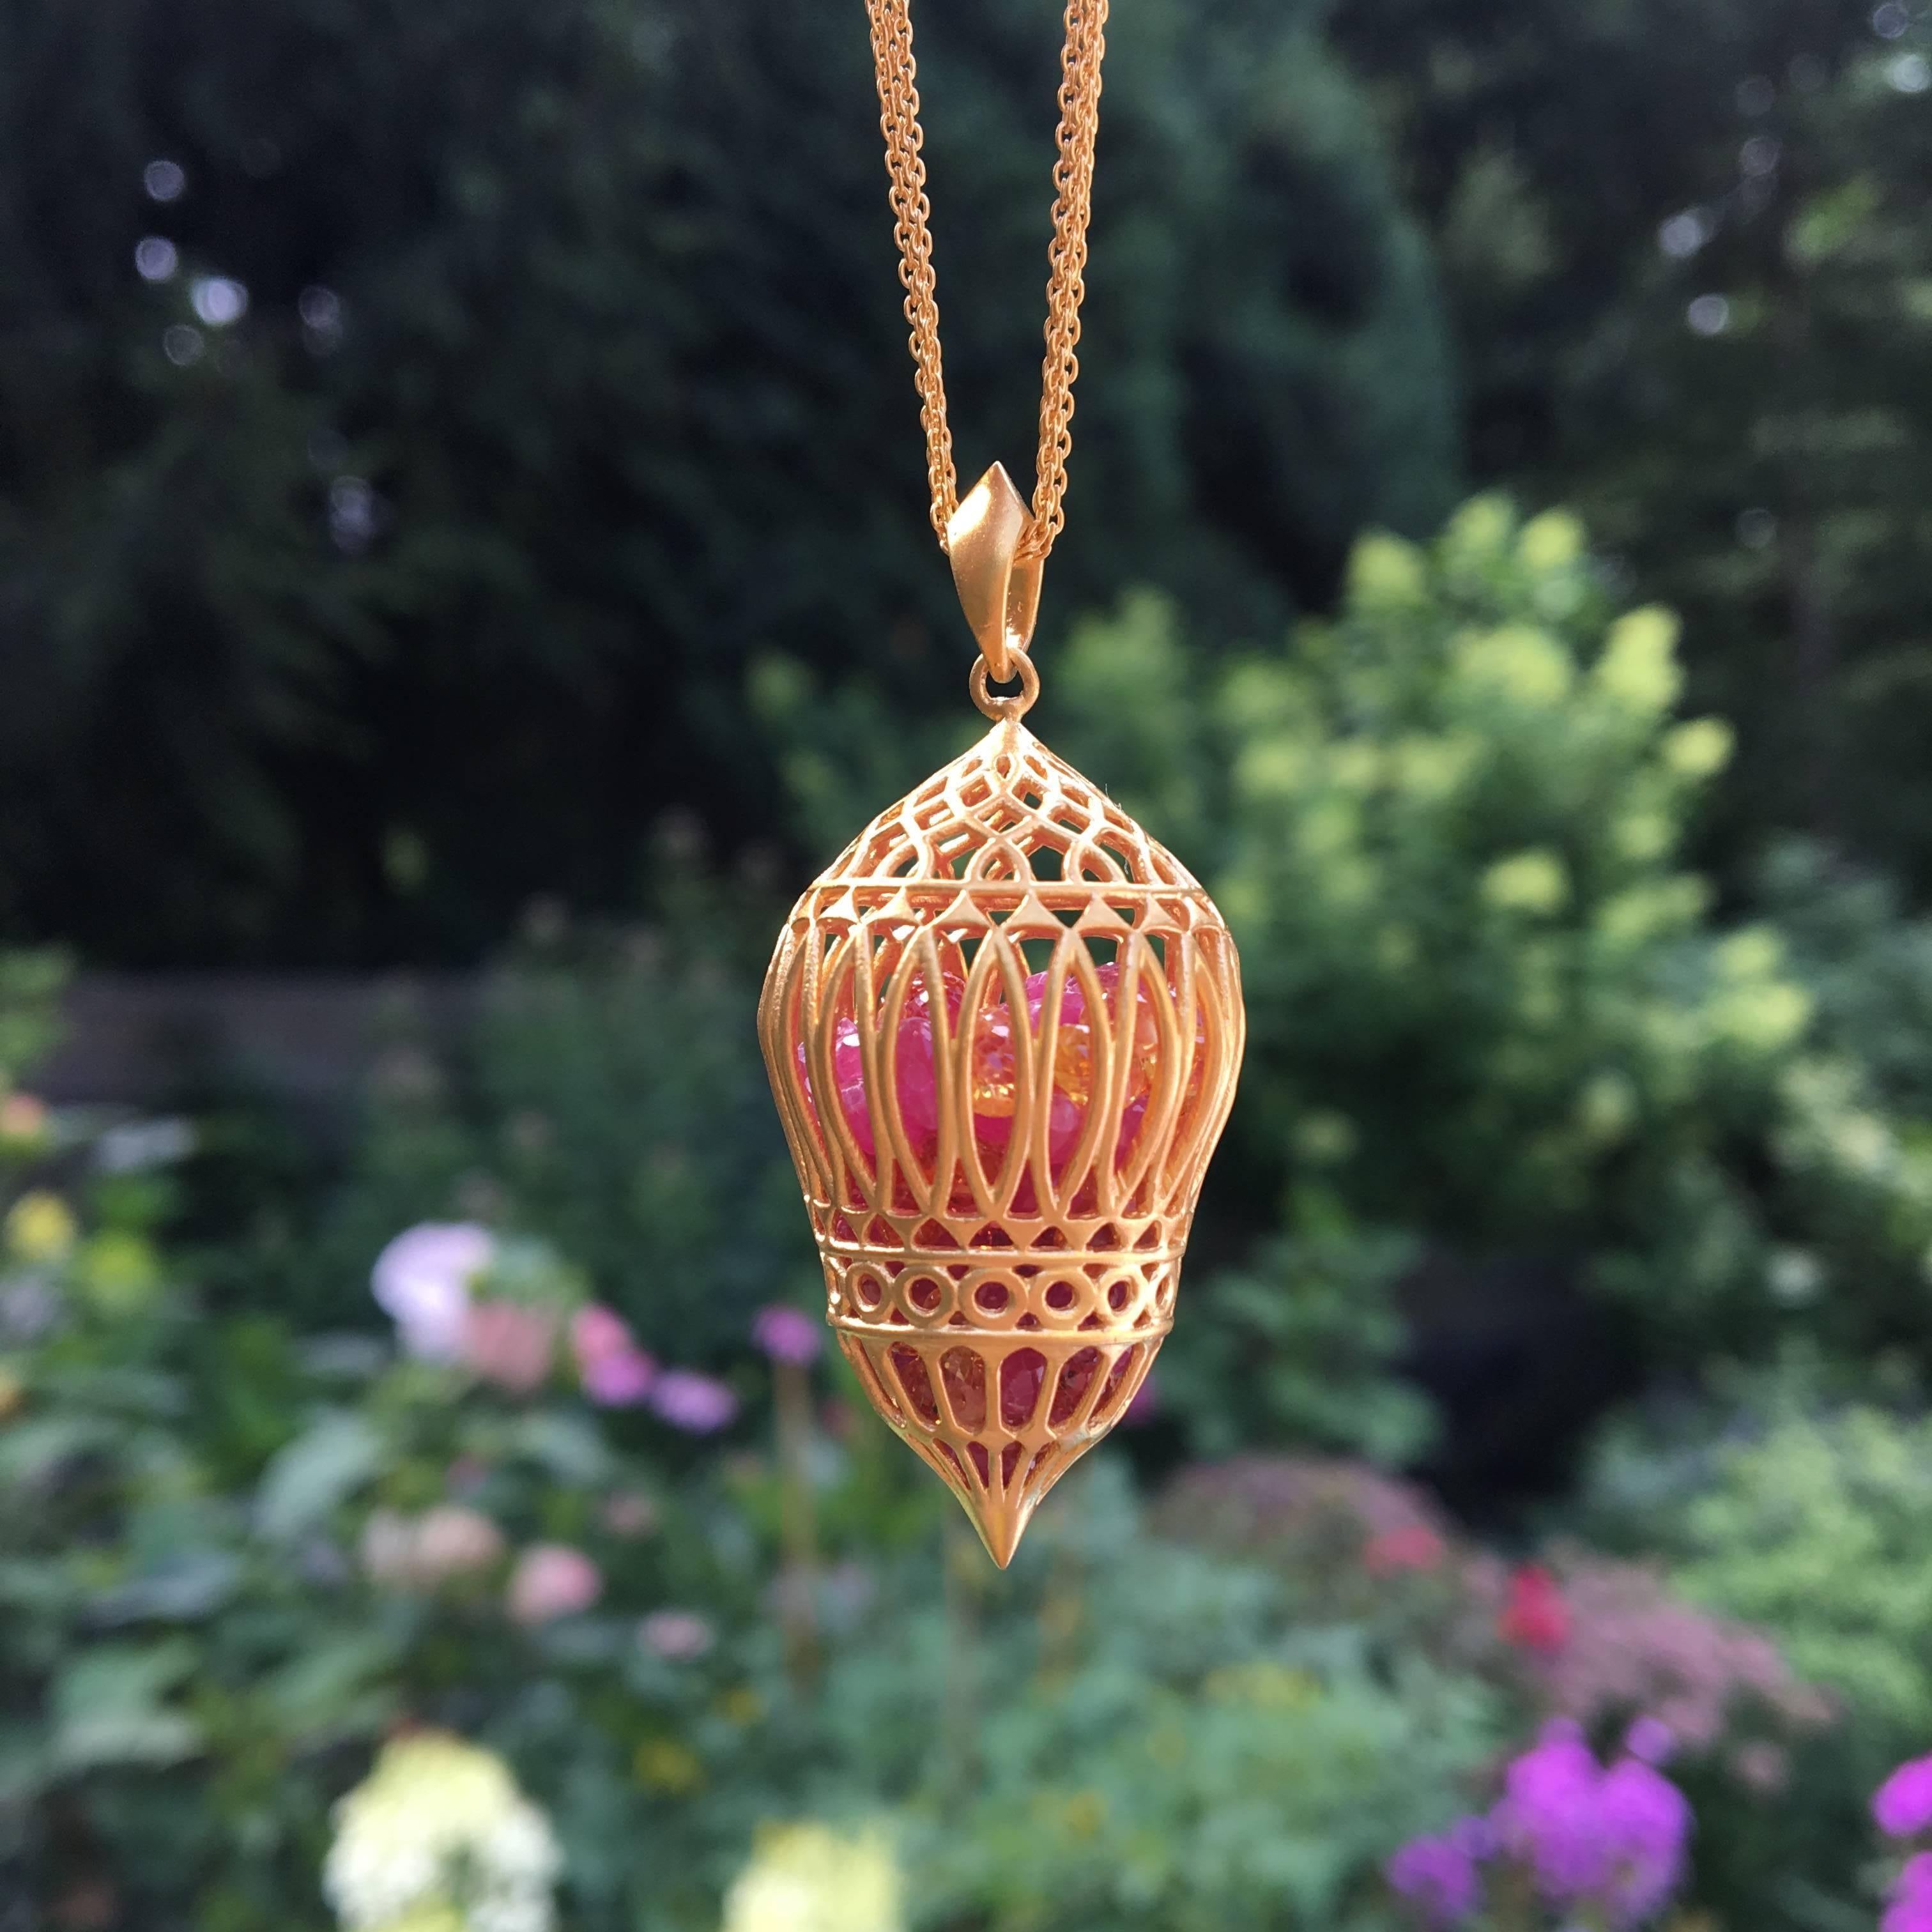 Bright pink, yellow and orange sapphires move freely inside this intricate 18kt Gold cage pendant.  Inspired by the shapes of the Taj Mahal, this pendant is romantic and feminine and as unique as they come.  Finished in Lauren Harper's signature